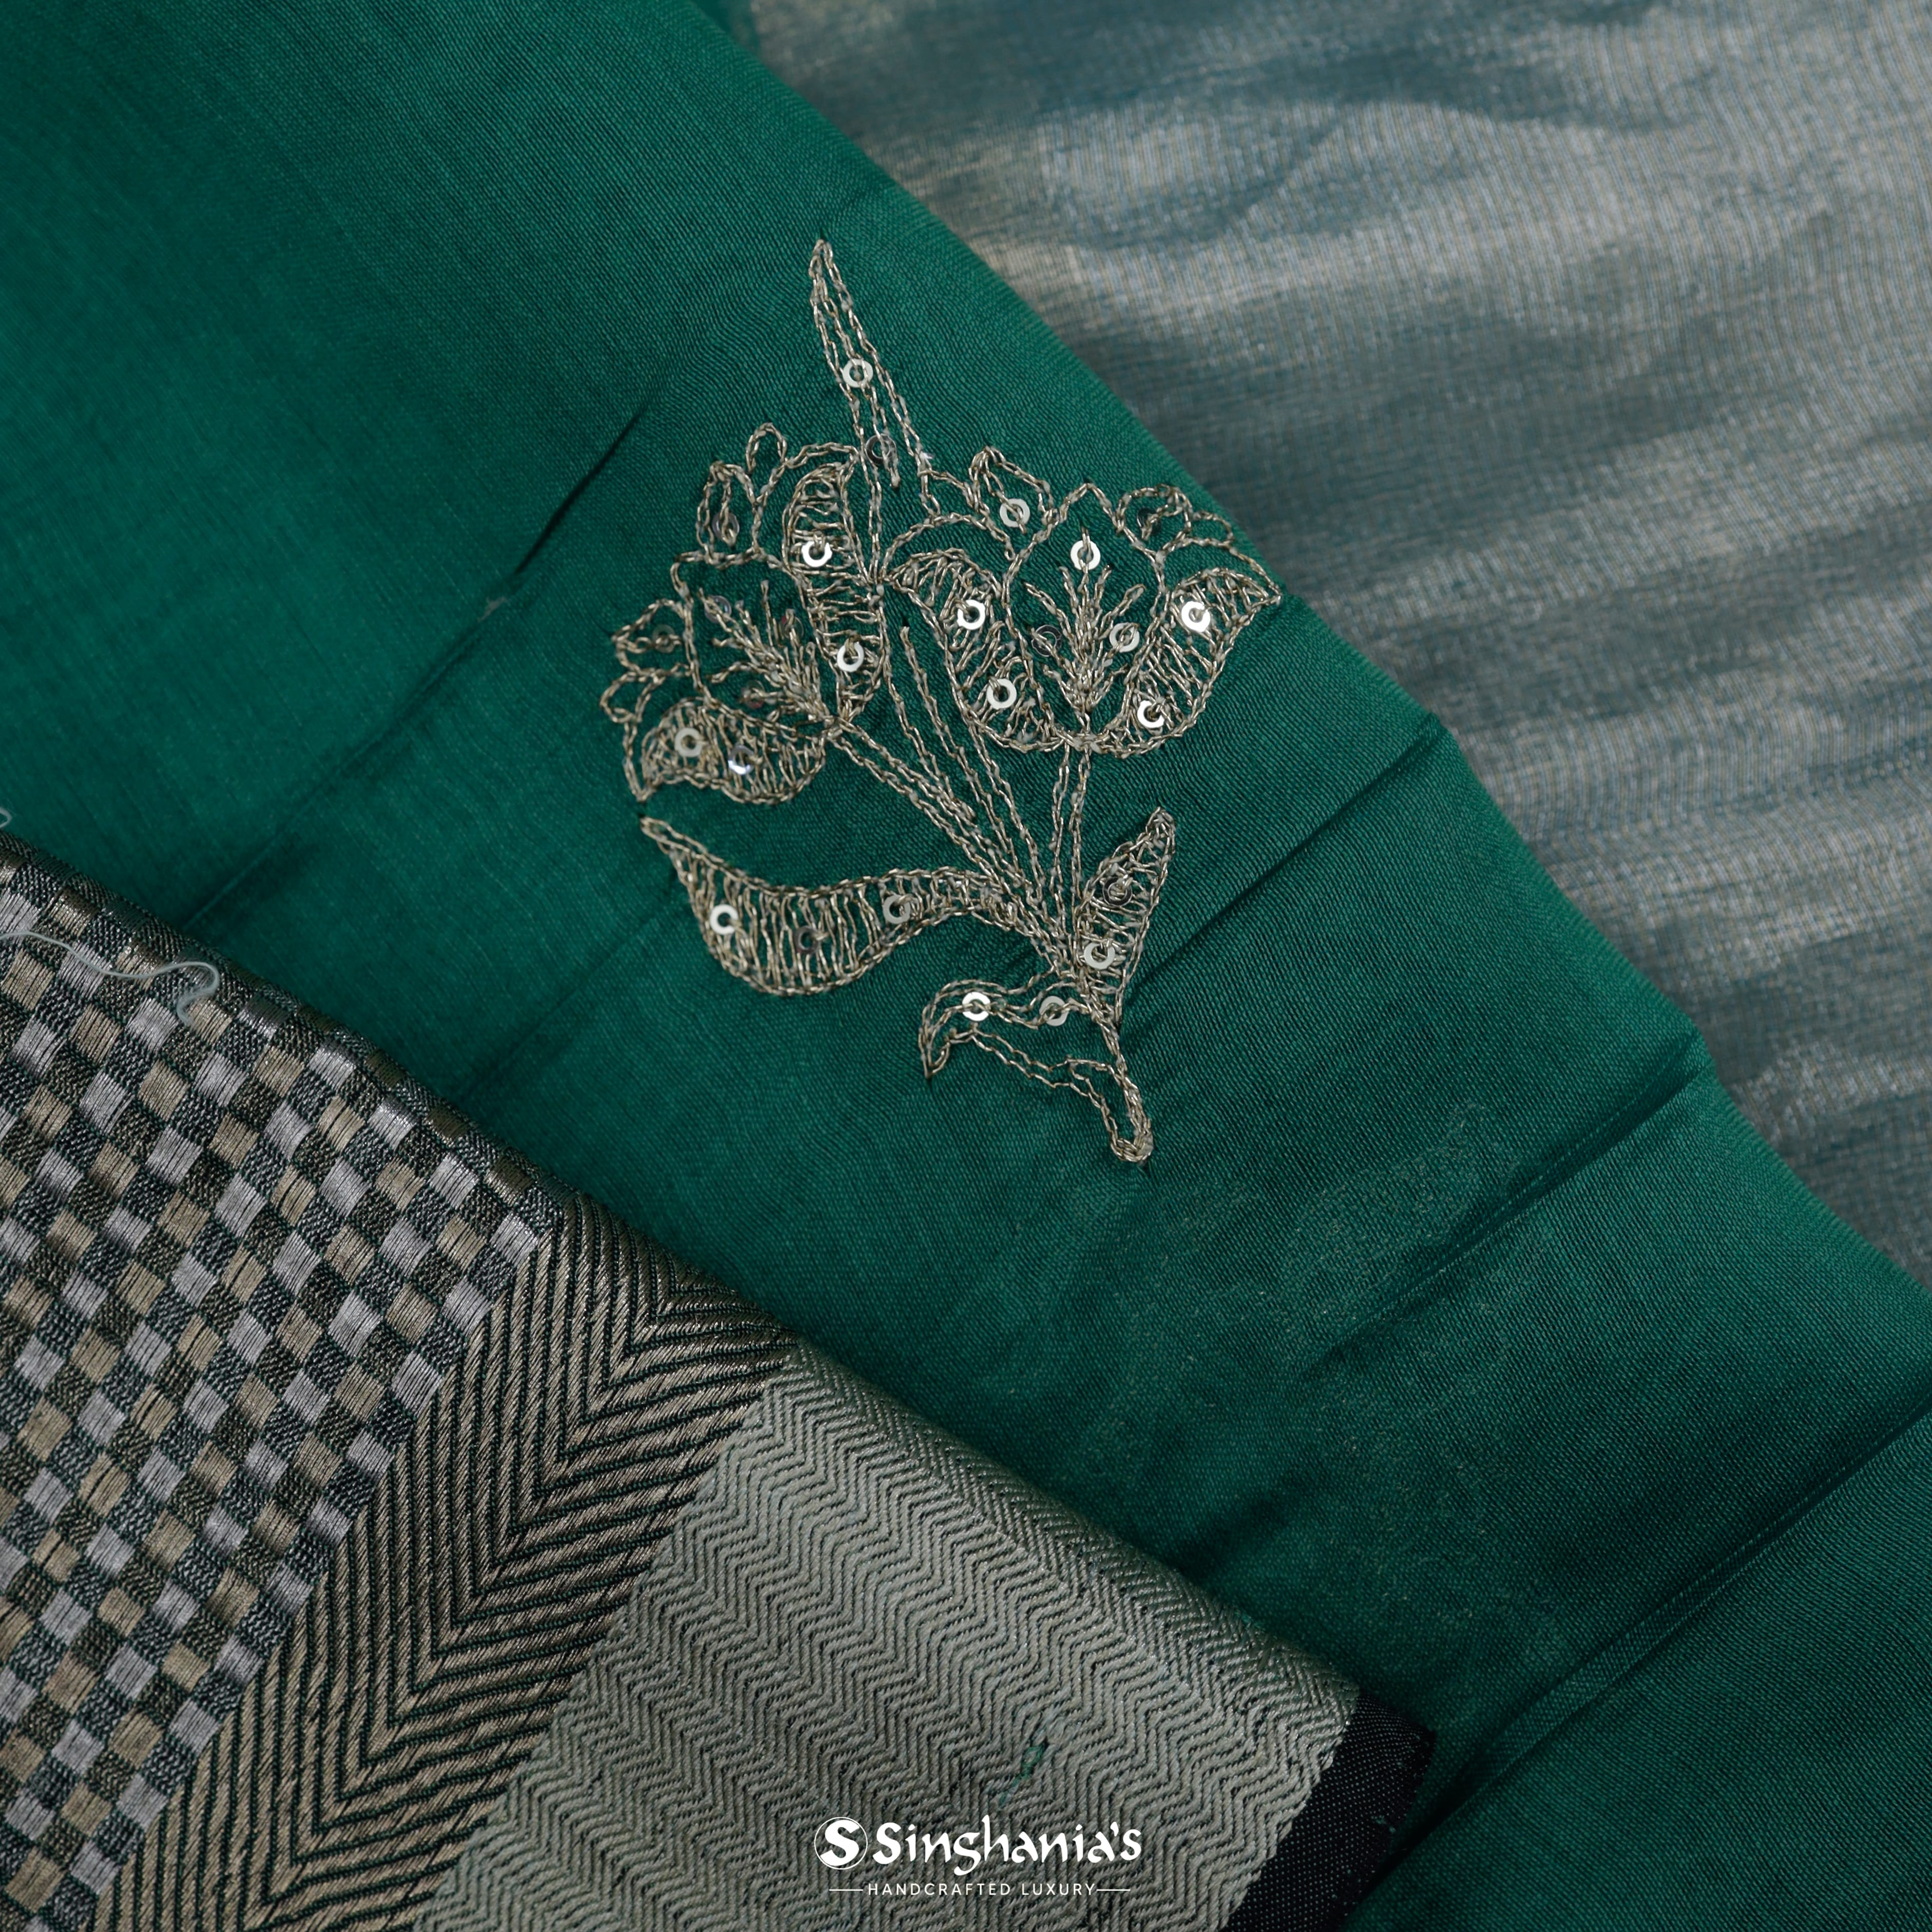 Myrtle Green Chanderi Embroidery Silk Saree With Floral Motif Pattern